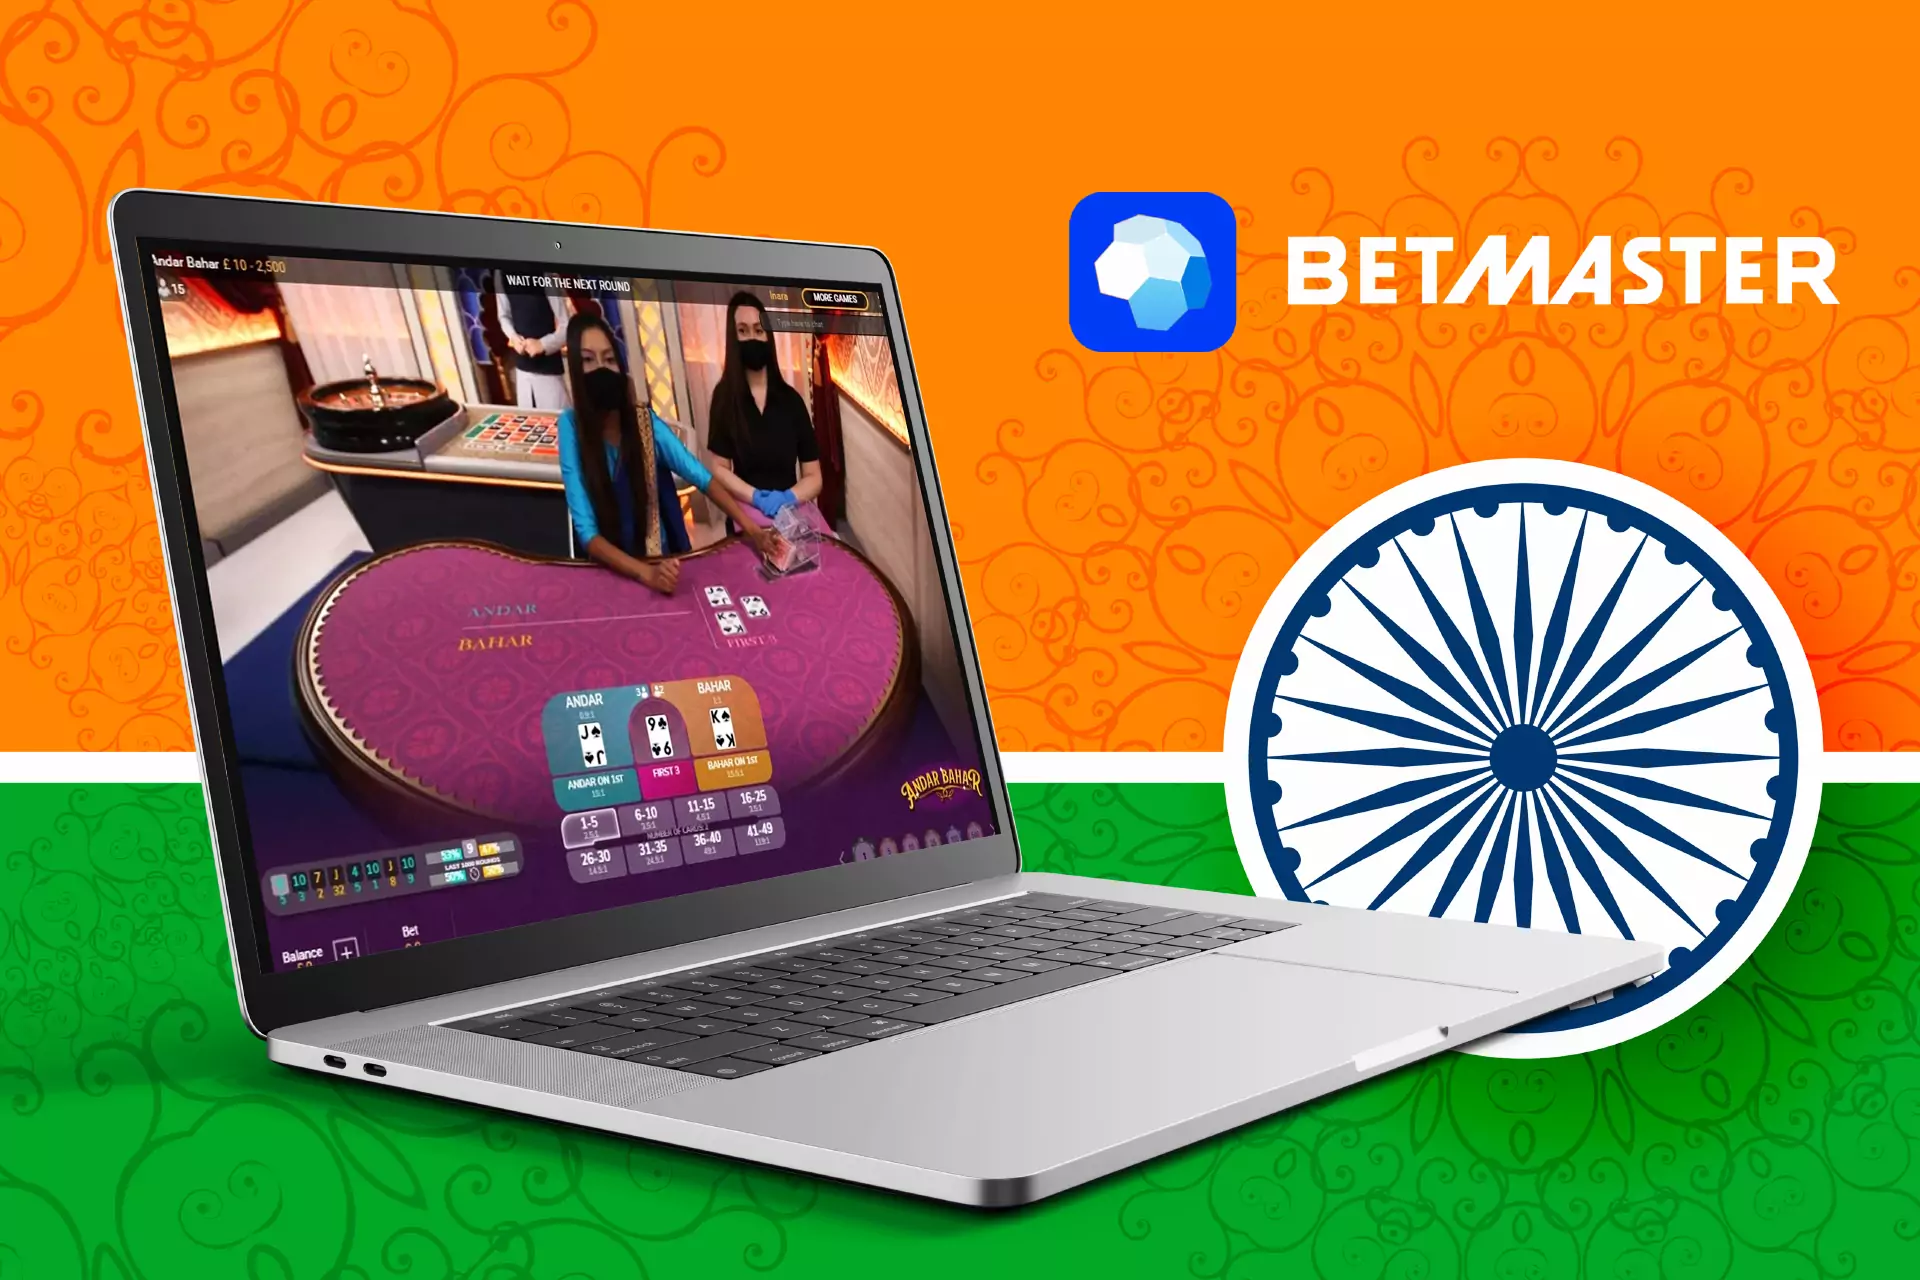 Betmaster is a modern betting and casino platform for Indian users.